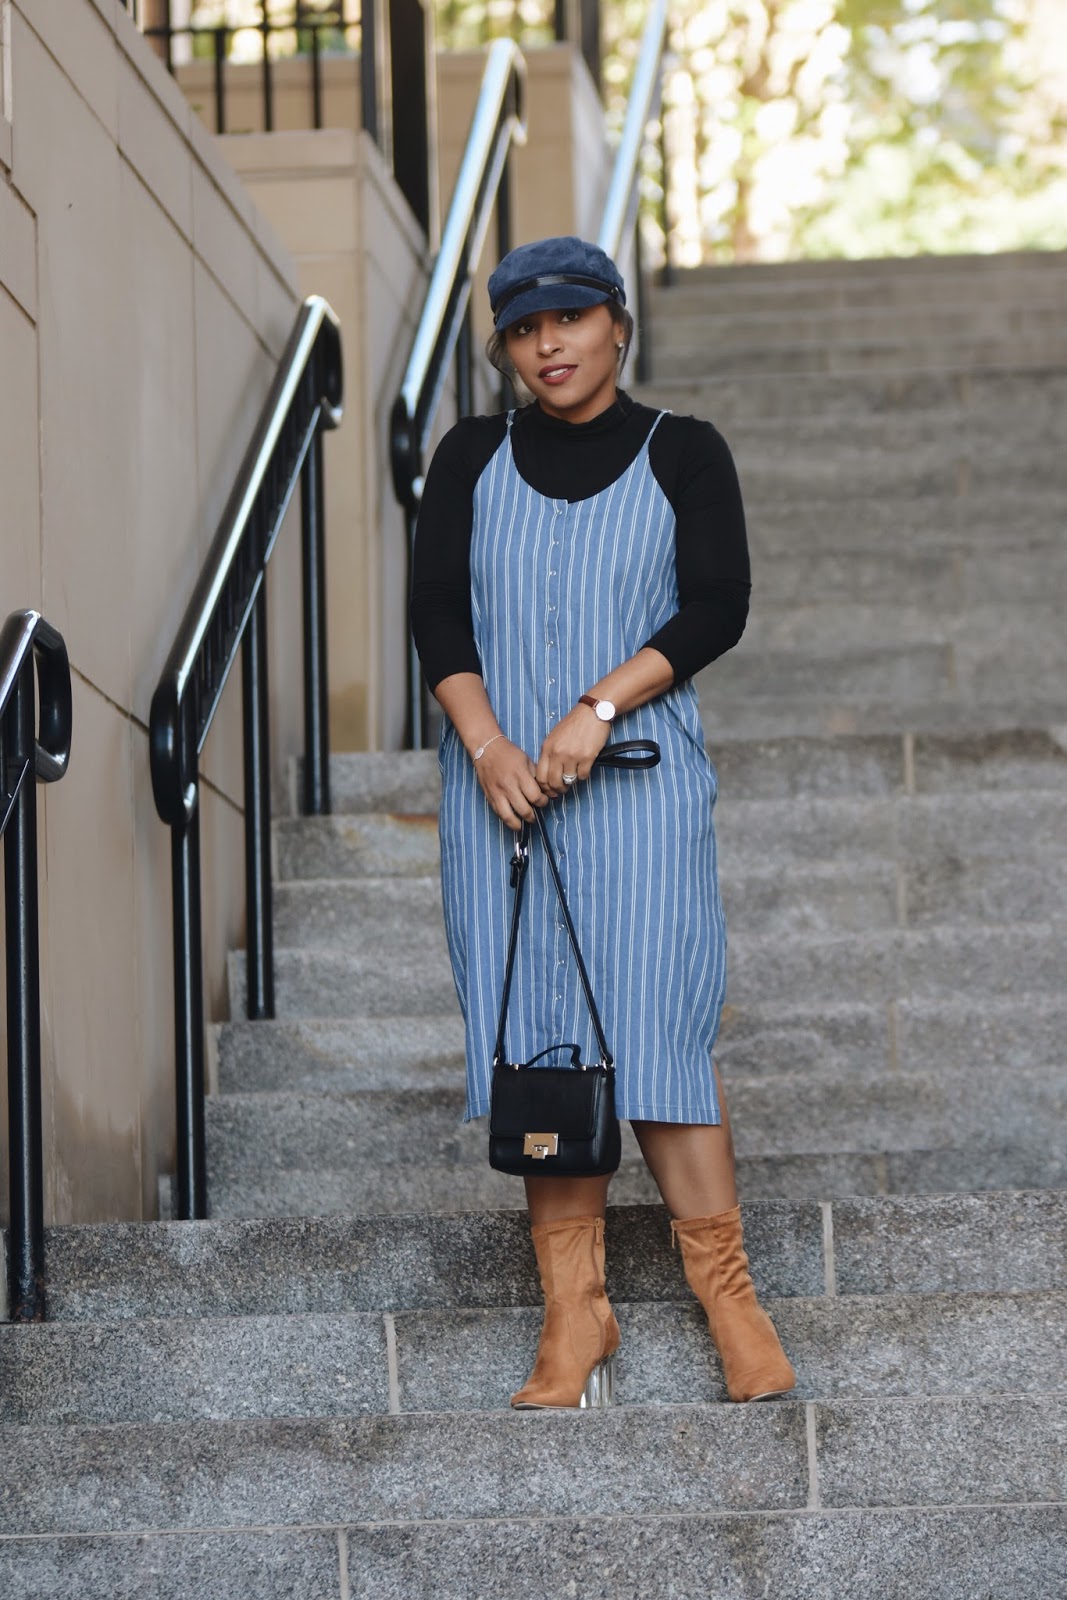 shop maude, pinstripe, fall fashion, cabbie hat, fall boots, fall outfit ideas, pinstripe dress, dc bloggers, cabbie hat trend, fall dresses